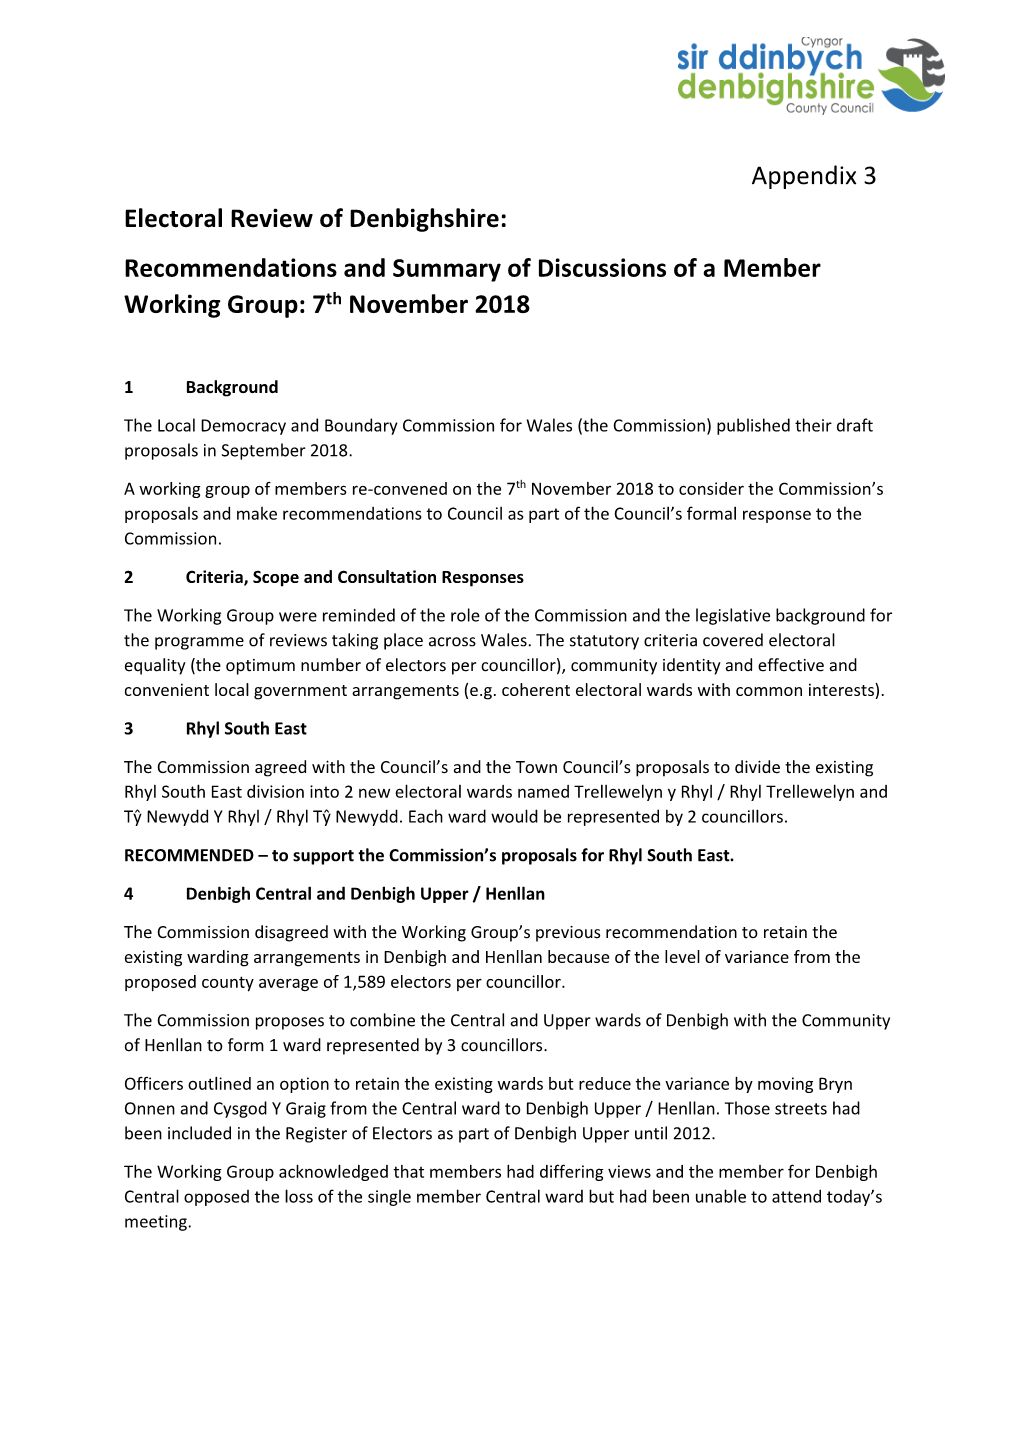 Electoral Review of Denbighshire: Recommendations and Summary of Discussions of a Member Working Group: 7Th November 2018